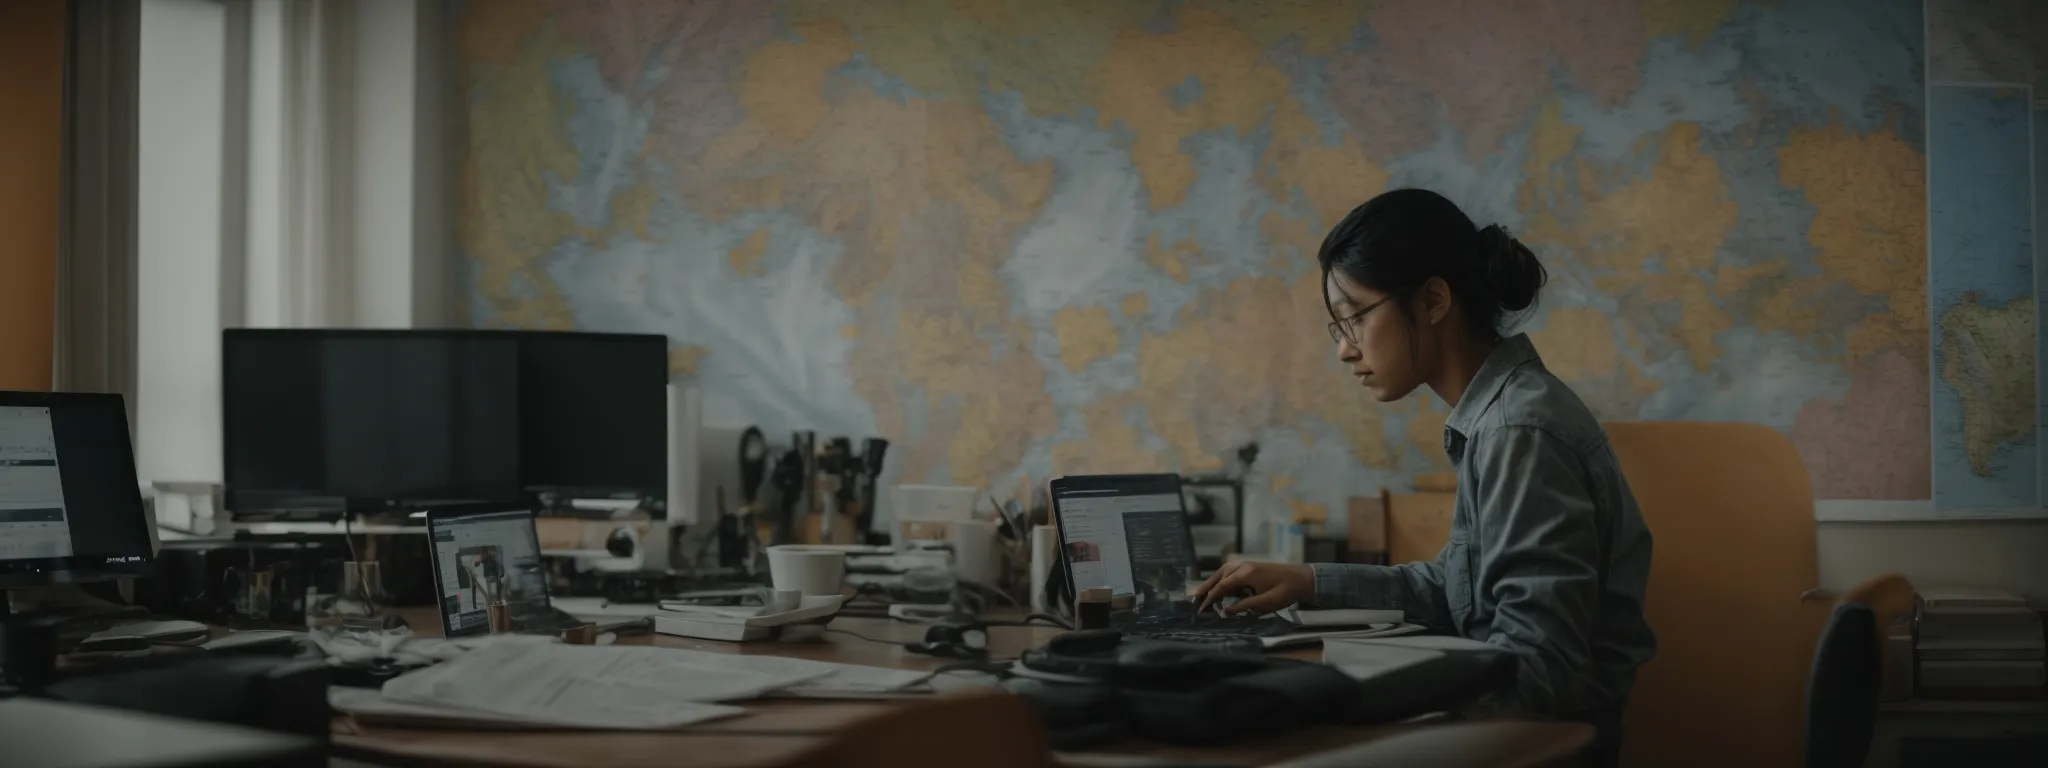 a person working on a computer with multiple world maps and language flags on the screen.